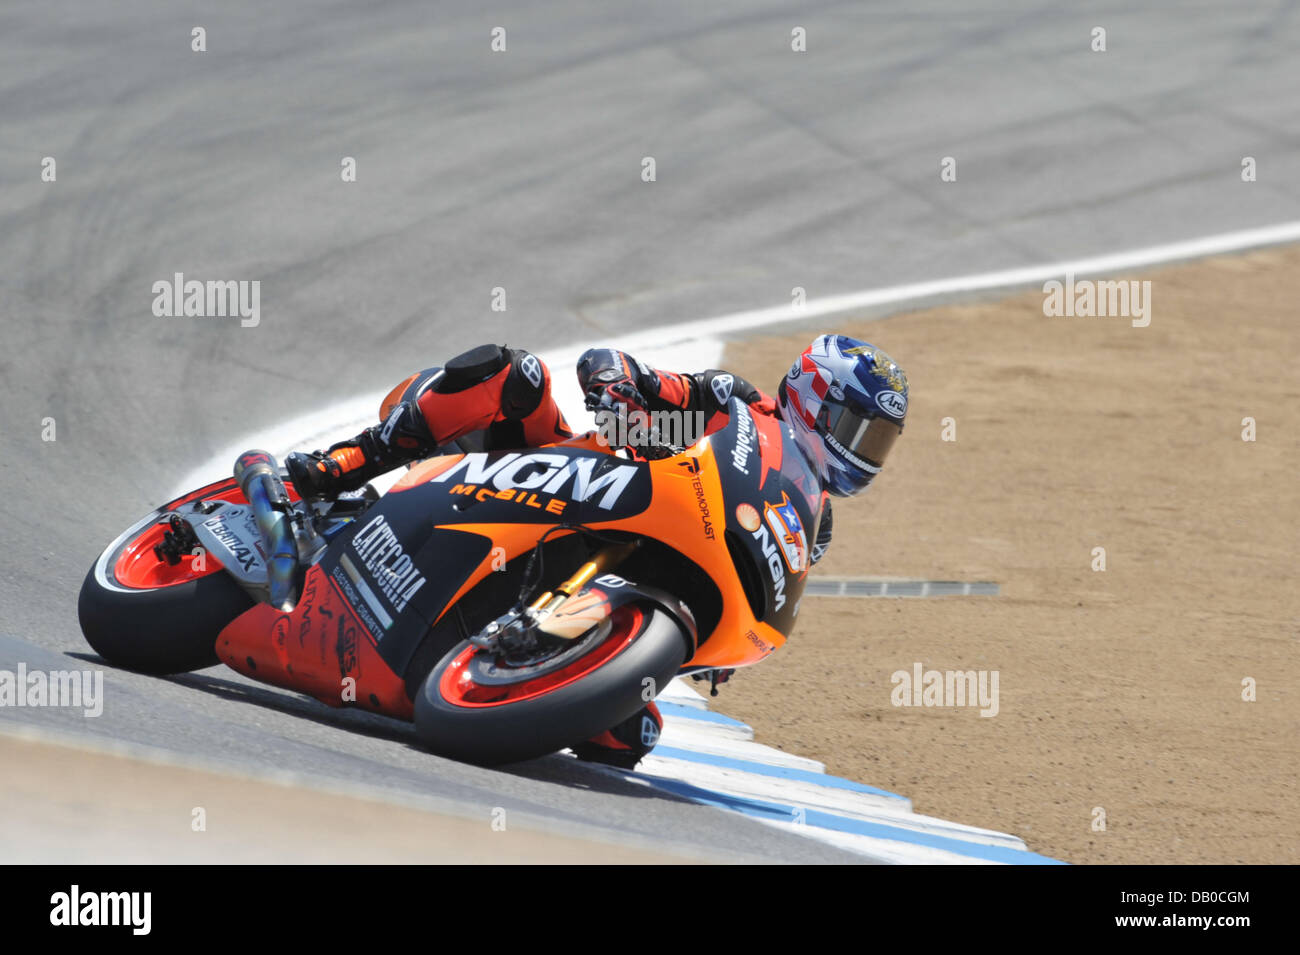 Monterey, California, USA. 20th July, 2013. NGM Mobile Forward Racing Rider COLIN EDWARDS of The United States (#5) during Saturday's qualifying session. Credit:  Scott Beley/ZUMAPRESS.com/Alamy Live News Stock Photo